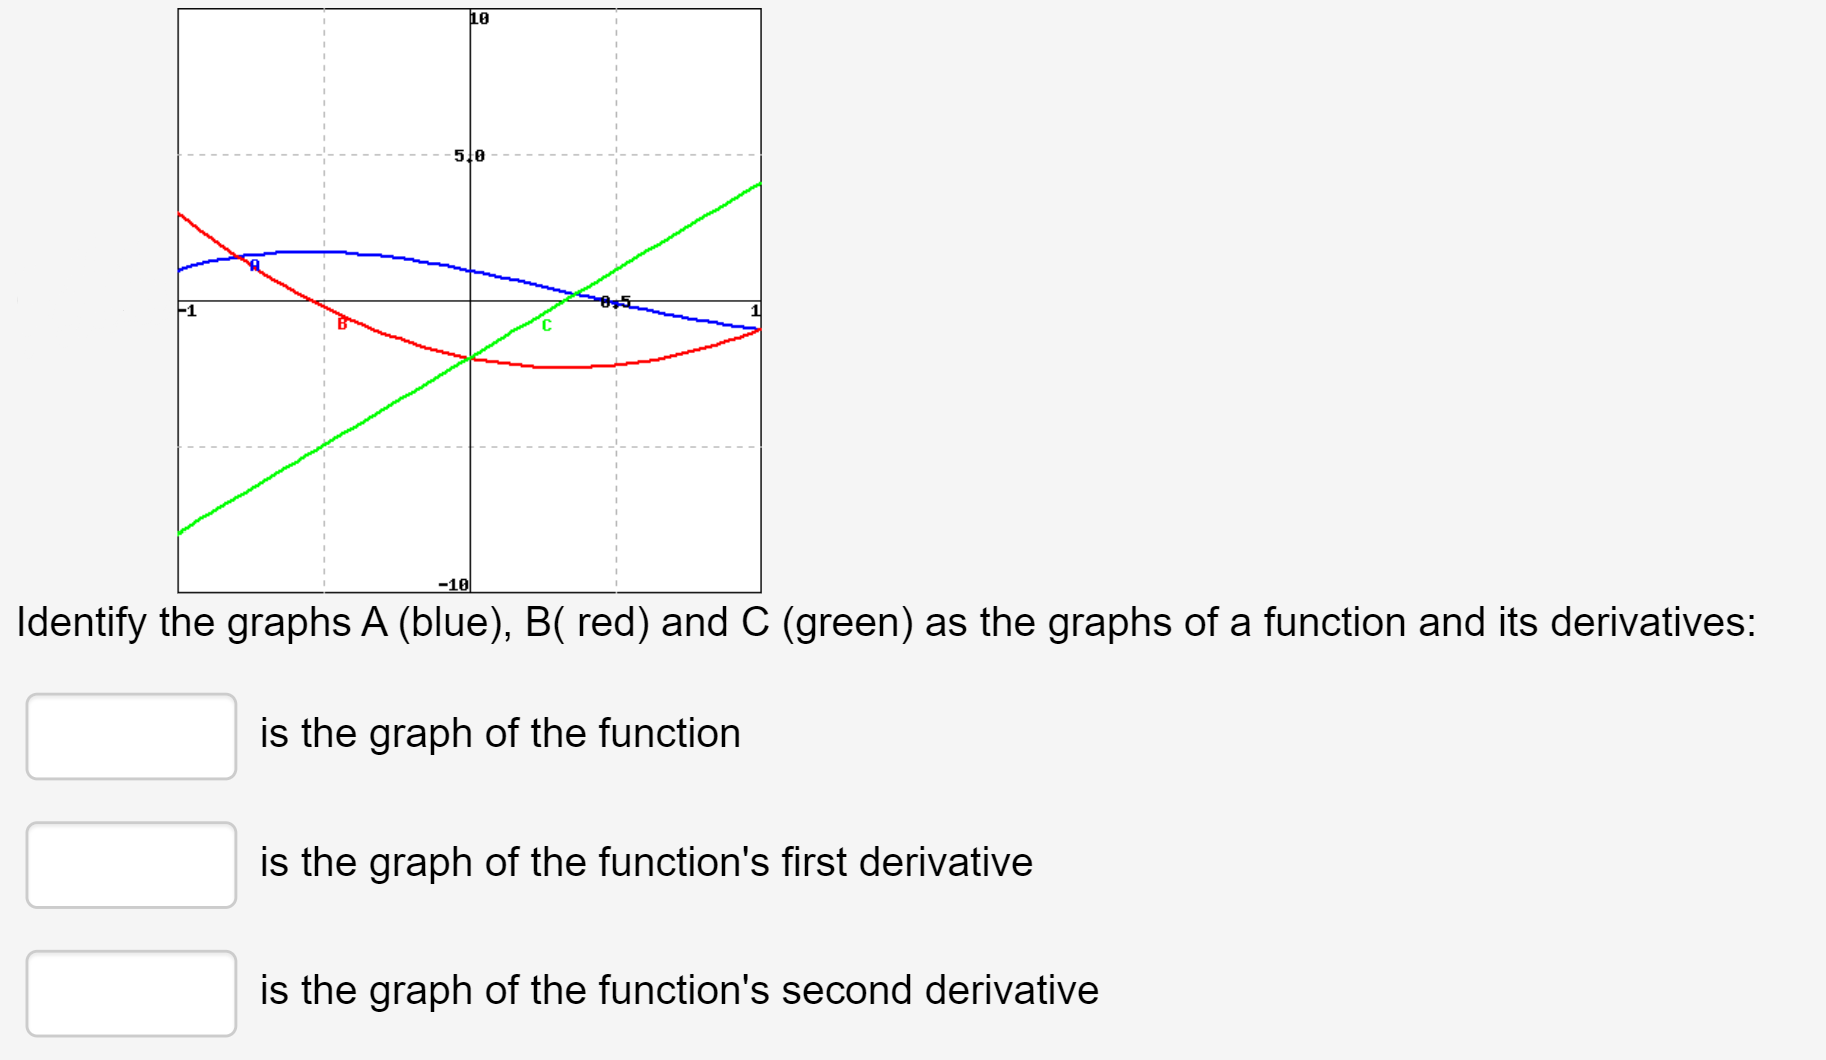 10
5 0
-1
-10
Identify the graphs A (blue), B( red) and C (green) as the graphs of a function and its derivatives:
is the graph of the function
is the graph of the function's first derivative
is the graph of the function's second derivative
